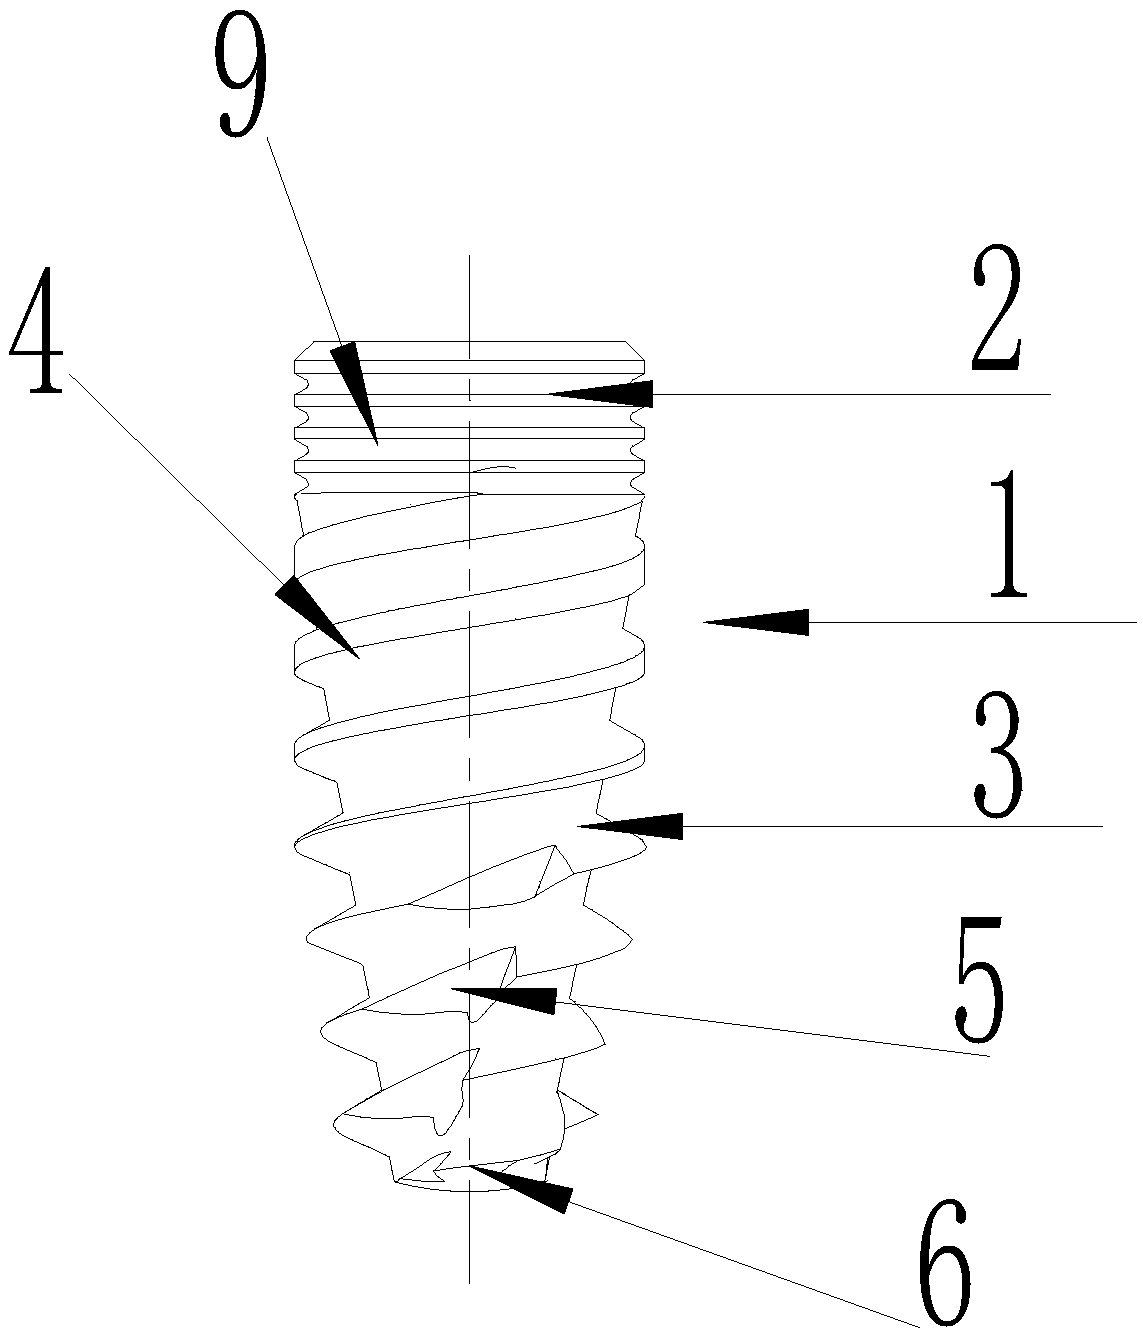 Implant with bone absorption resistance